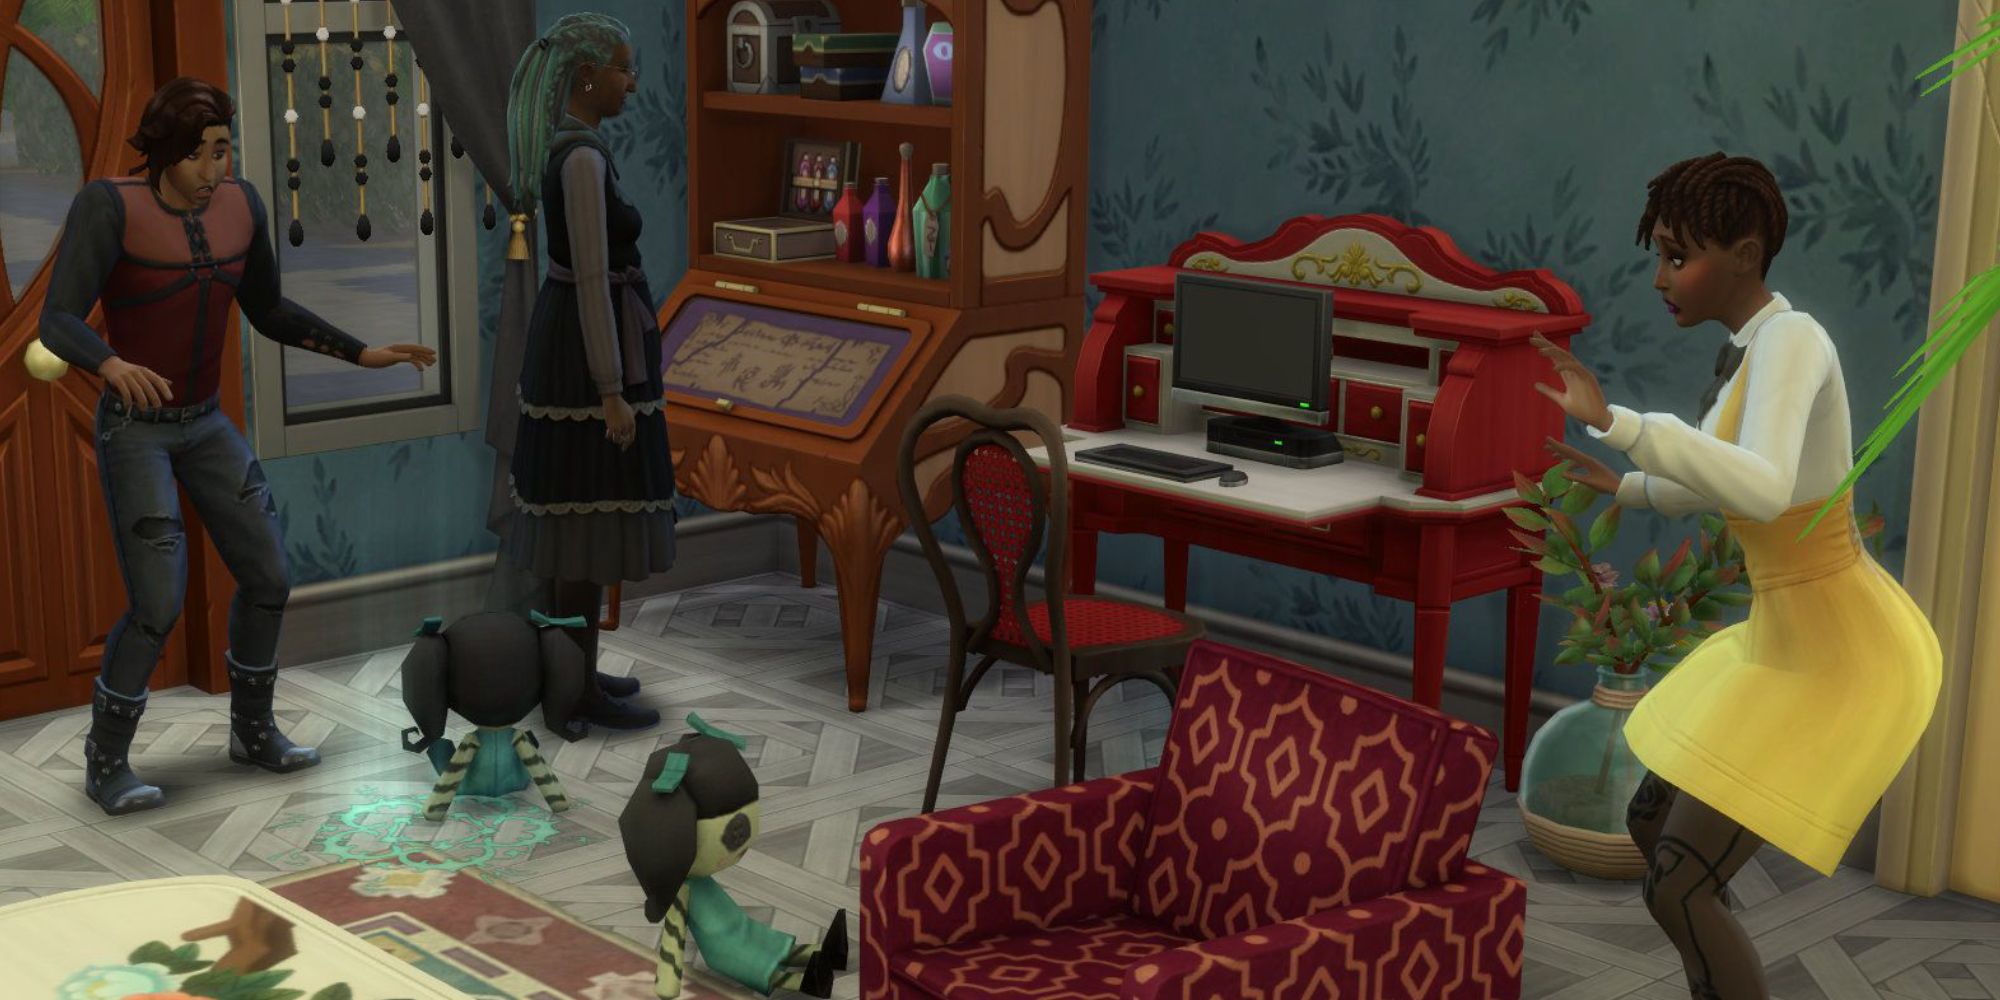 Sims 4 Paranormal Stuff spooky dolls on the floor